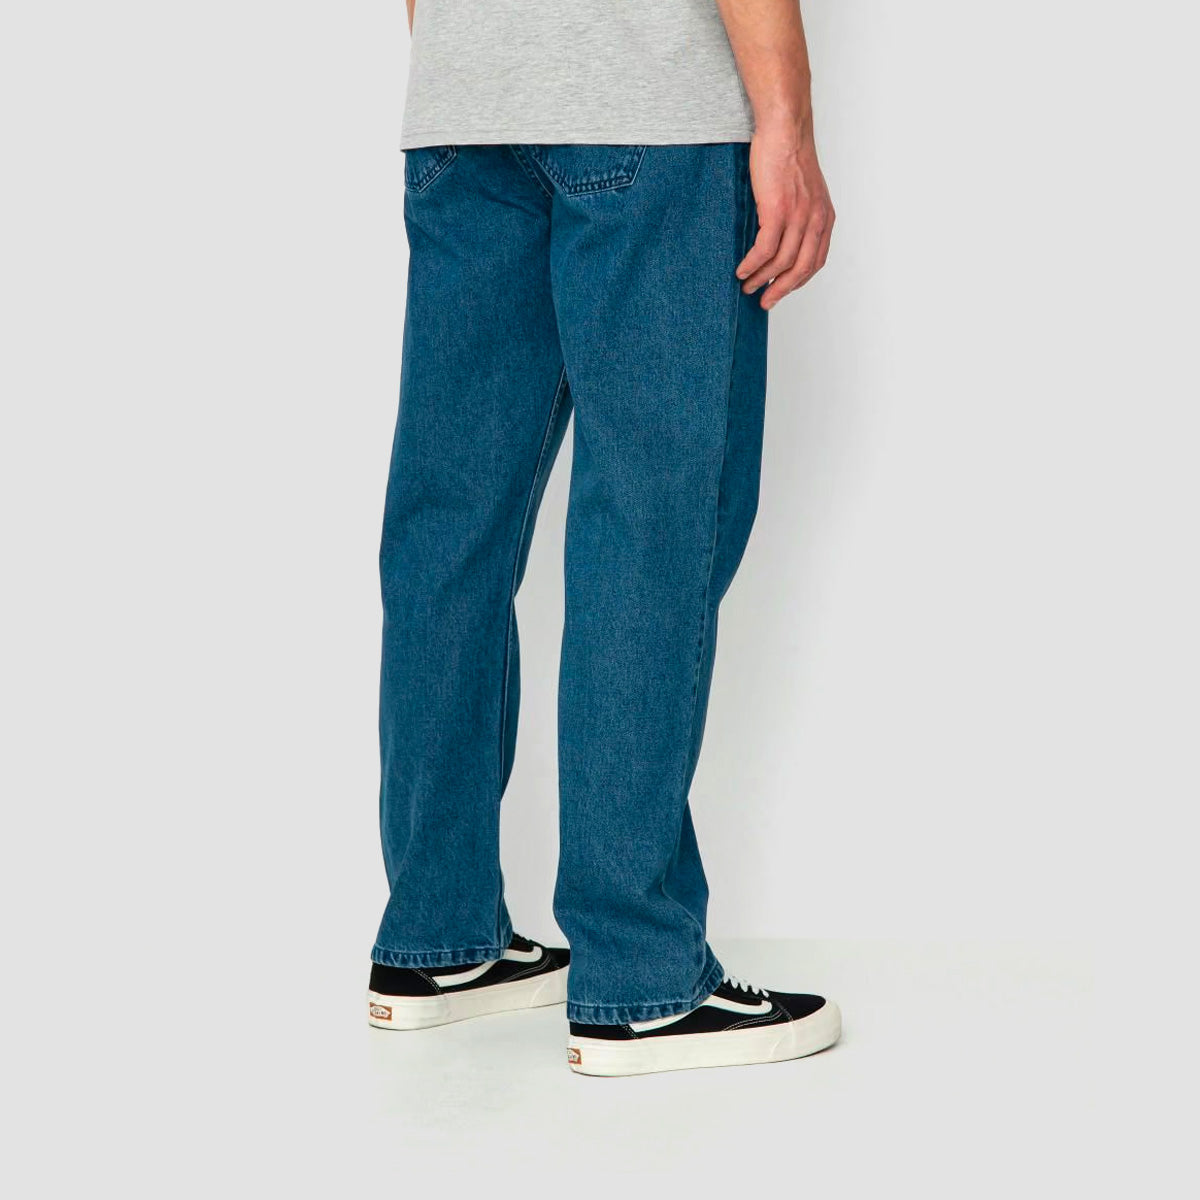 eS X Muckmouth Jeans Stone Wash